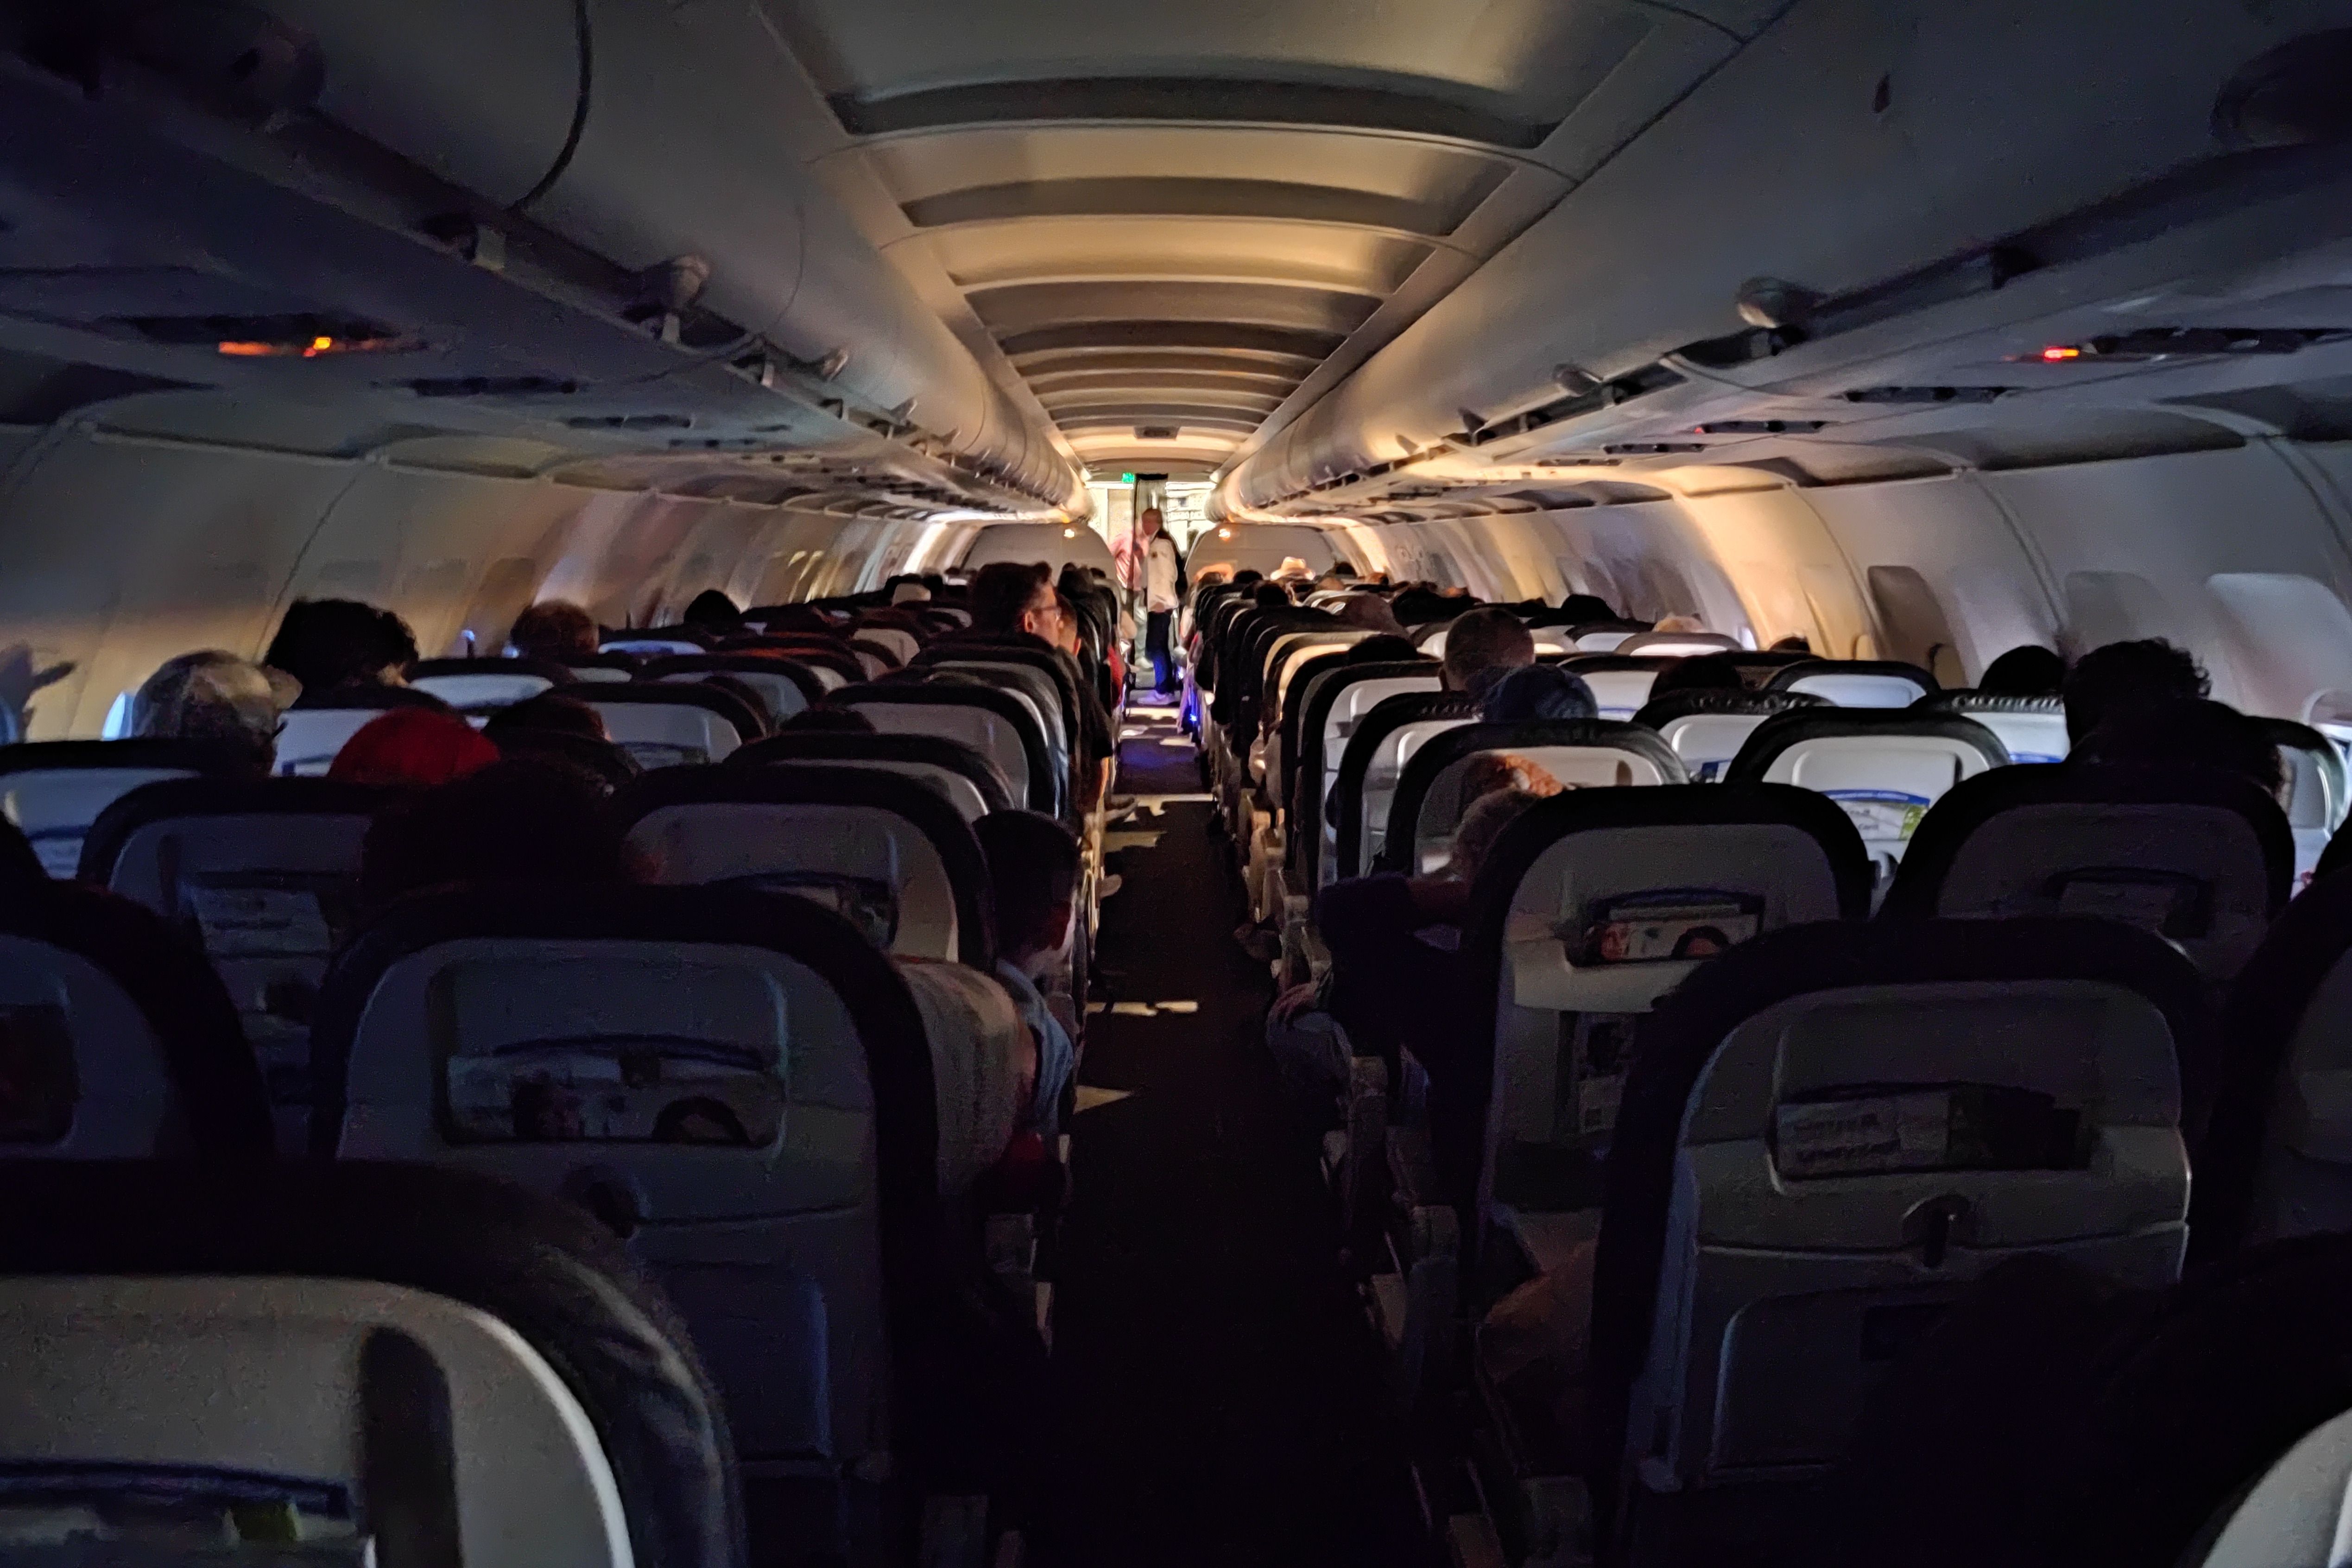 Onboard a United Airlines Airbus A319 aircraft cabin with the lights dimmed.